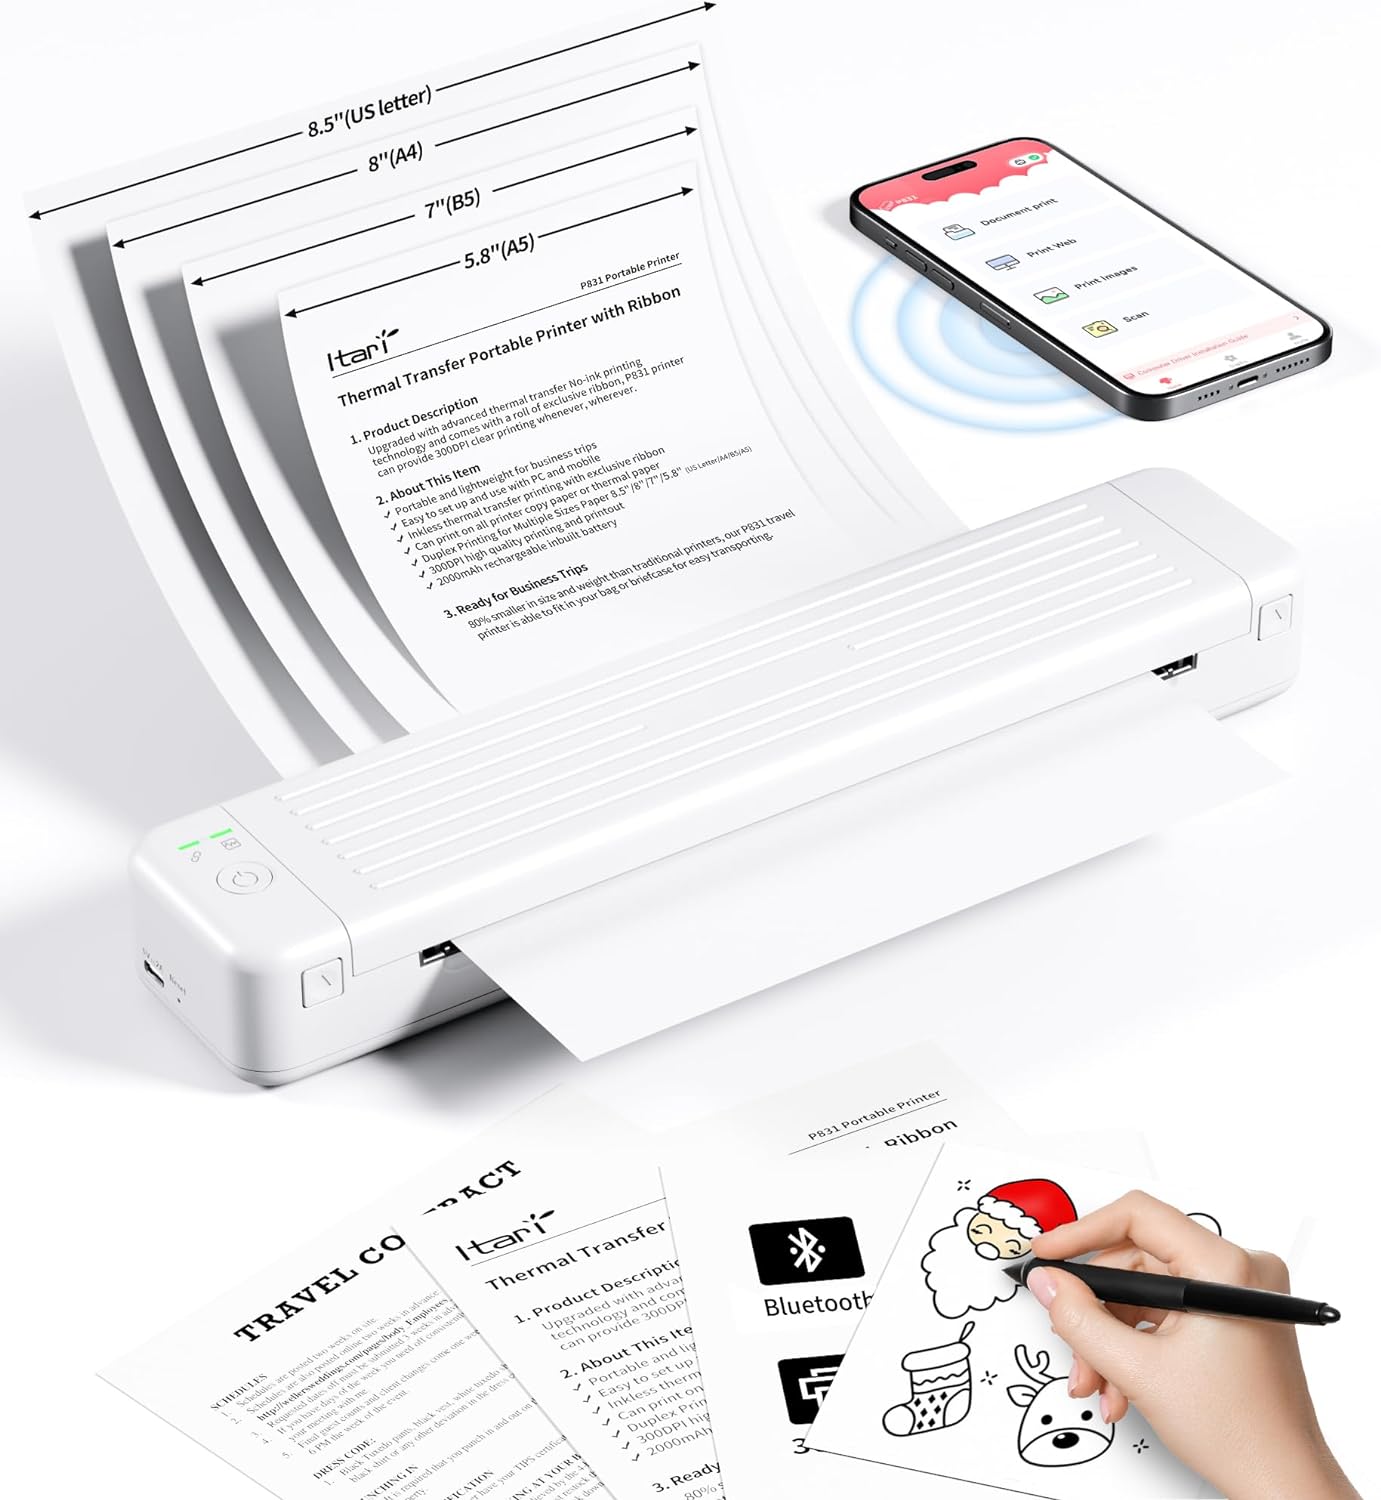  Phomemo M832 Portable Printers Wireless for Travel, Upgrade  Bluetooth Thermal Printer, No Ink Printer Support 8.5'' x 11'' Letter & A4  Thermal Roll Paper, Compatible with Phone & Laptop : Office